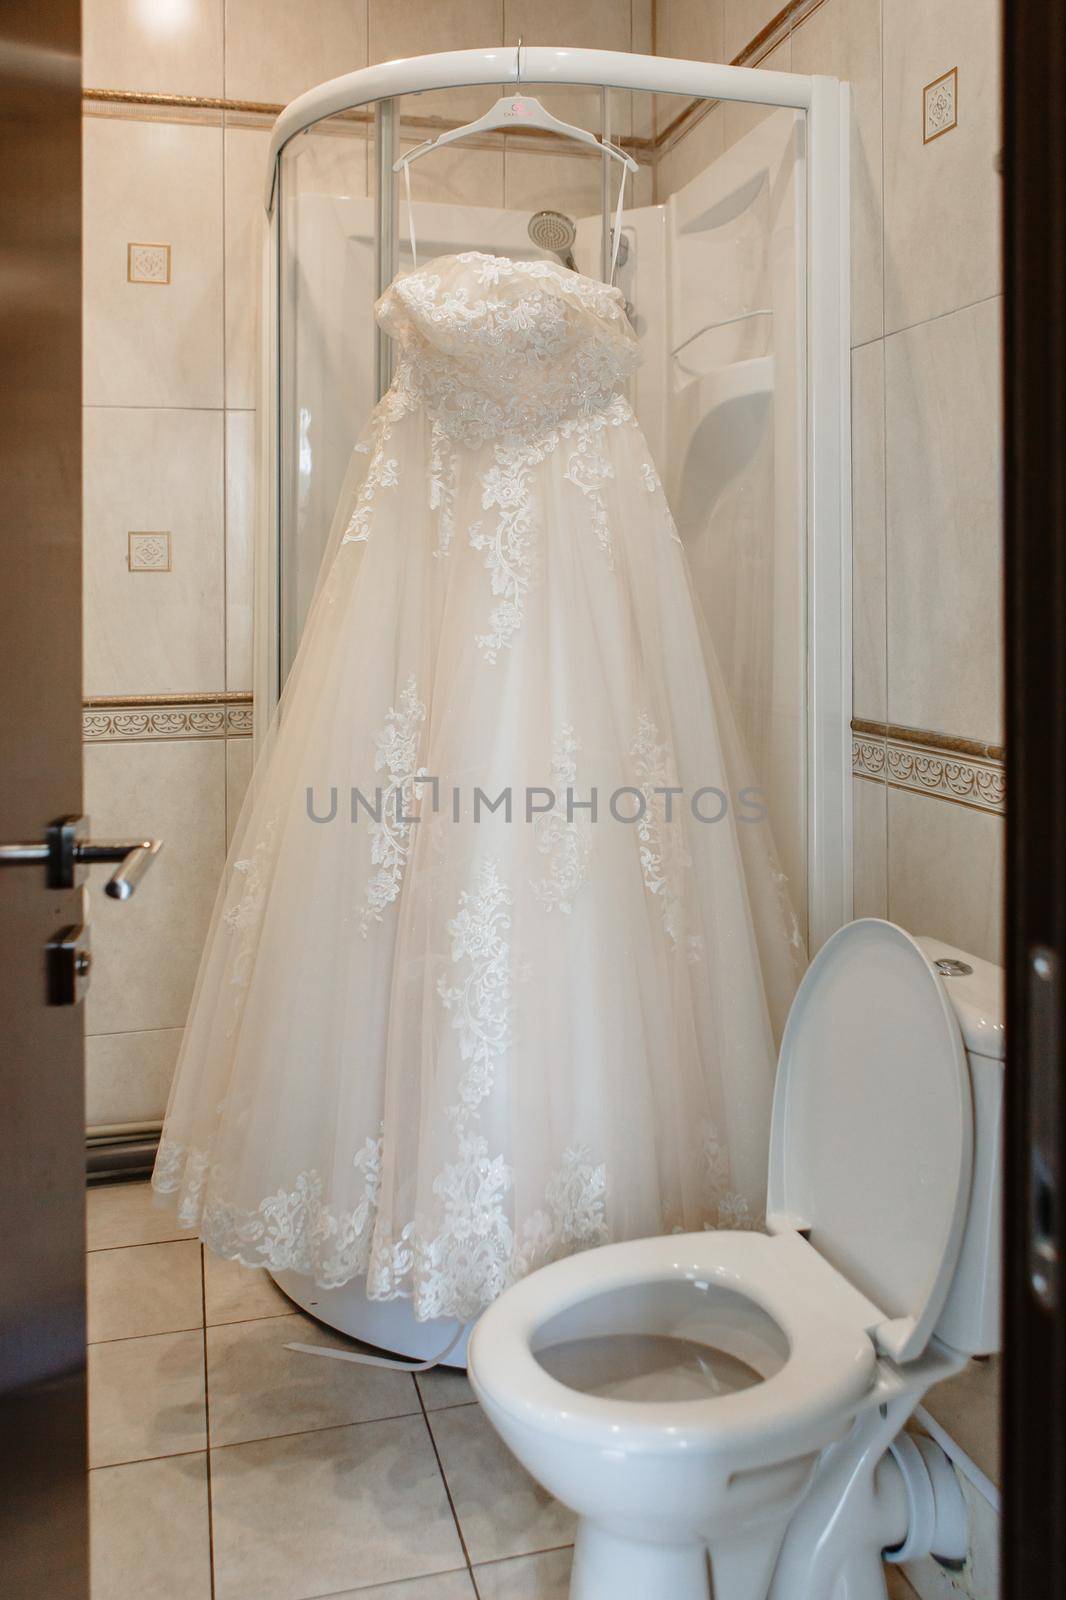 Wedding dress hanging on the shower stall in the bathroom.